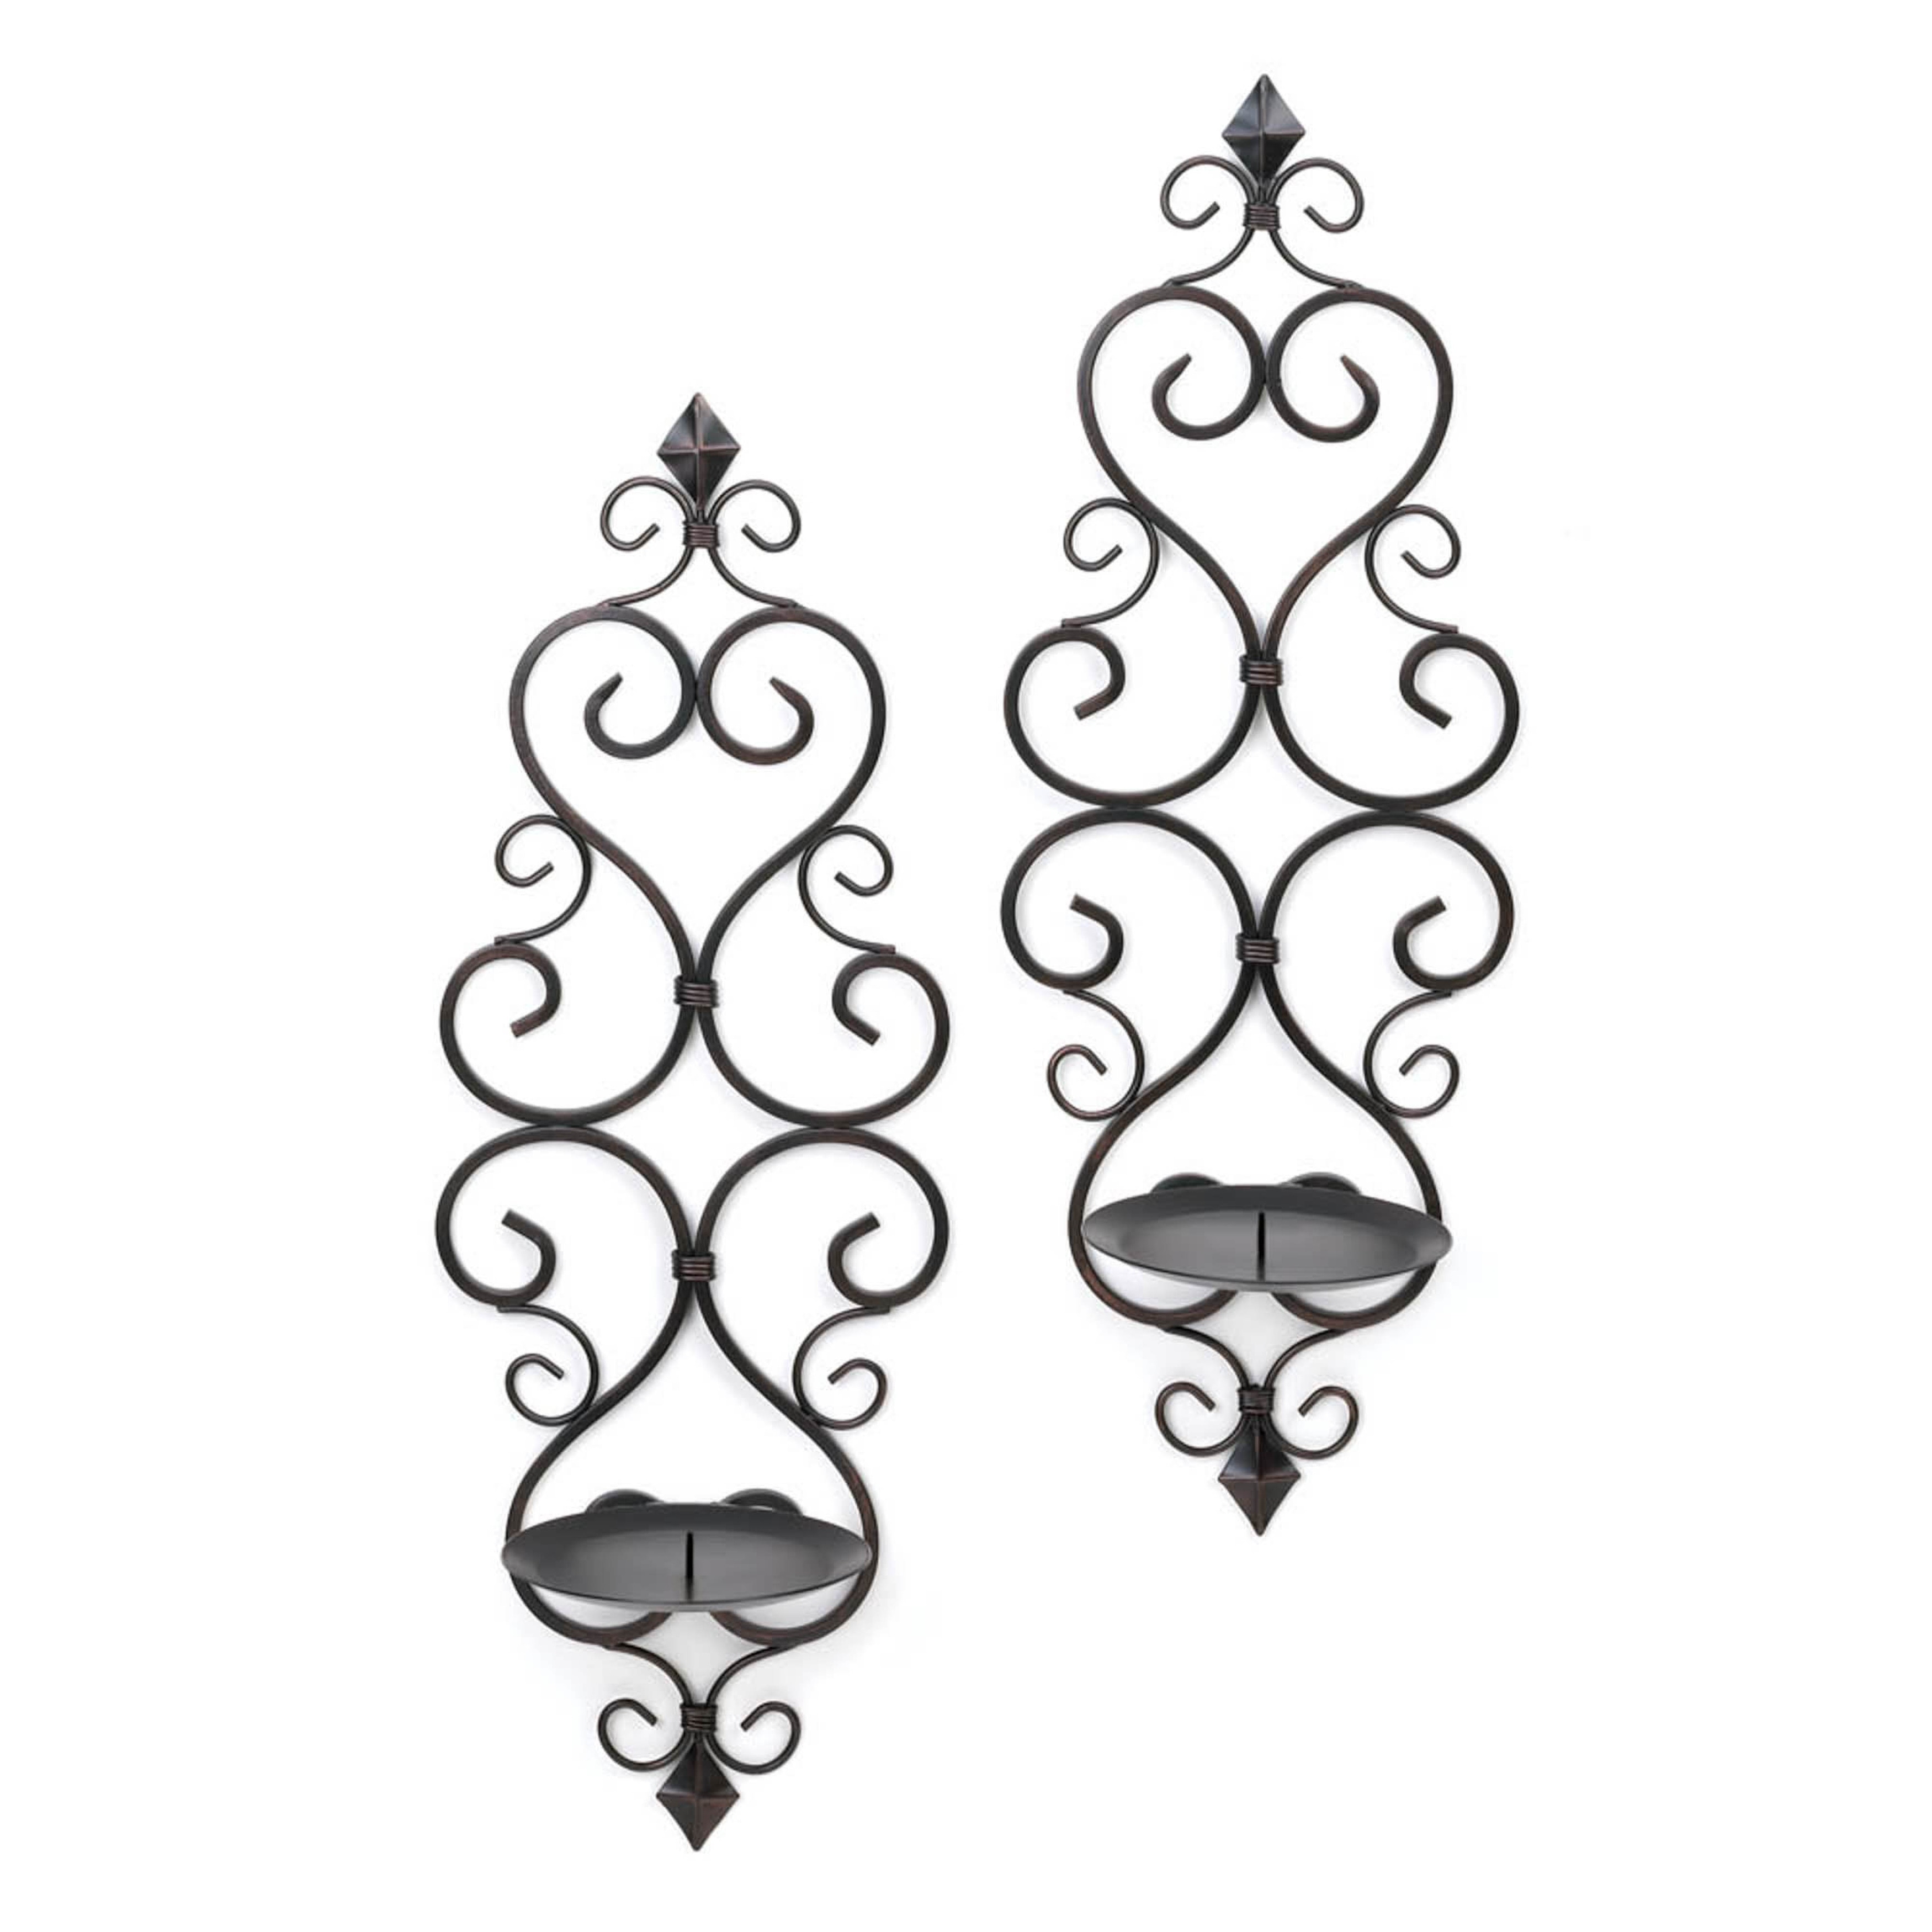 14 18"H 2 Sm Details about   Set of 4 Santiago Scrolled Sconces w/ Intricate Designs Iron 2 Lg 